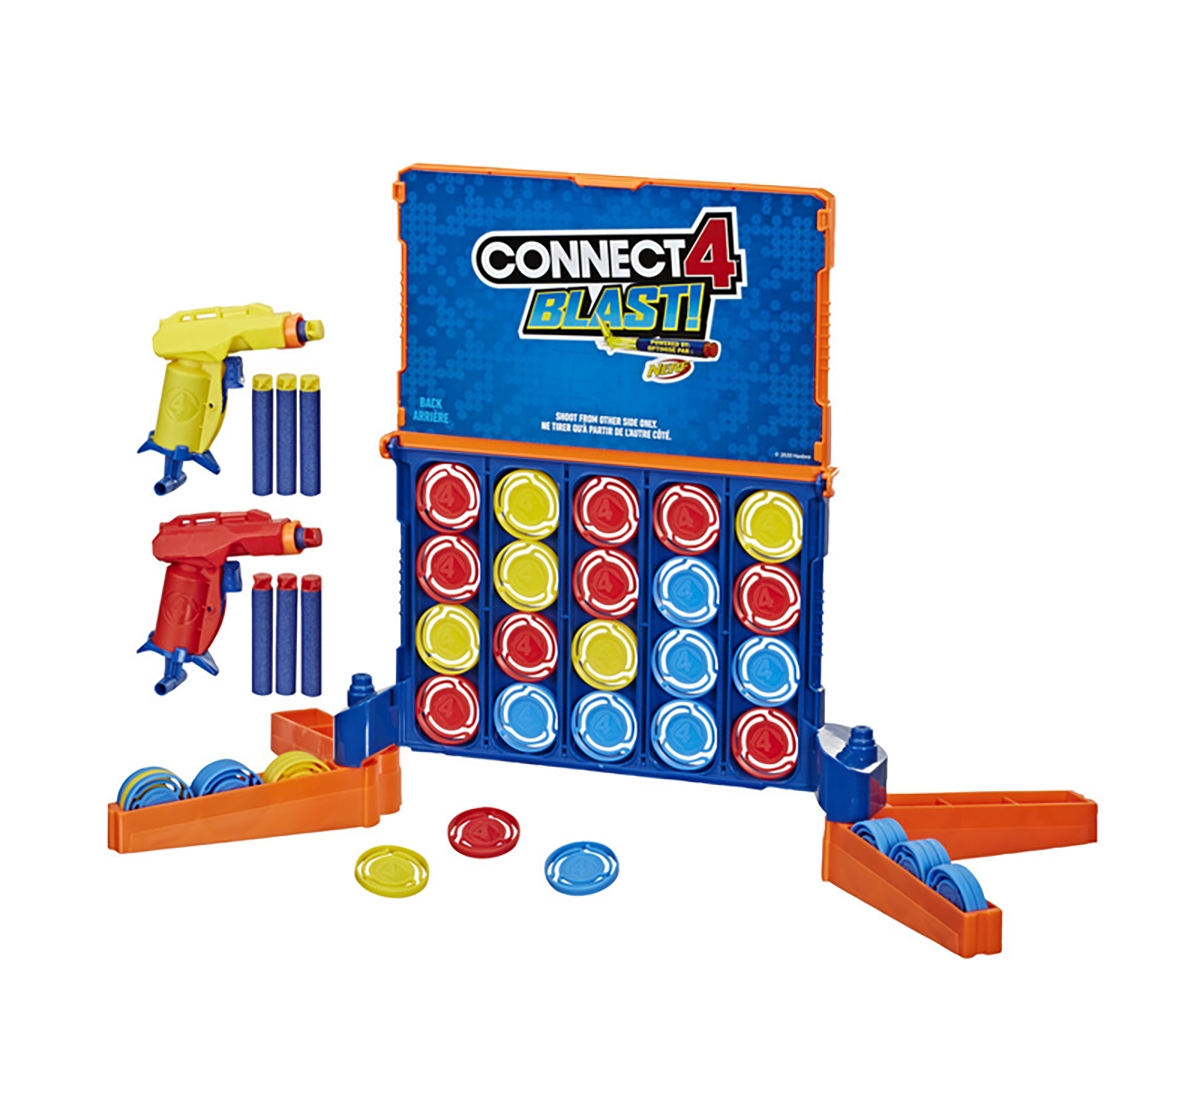 Hasbro Gaming | Hasbro Connect 4 Blast! Game With Nerf Blasters Games for Kids age 8Y+ 7